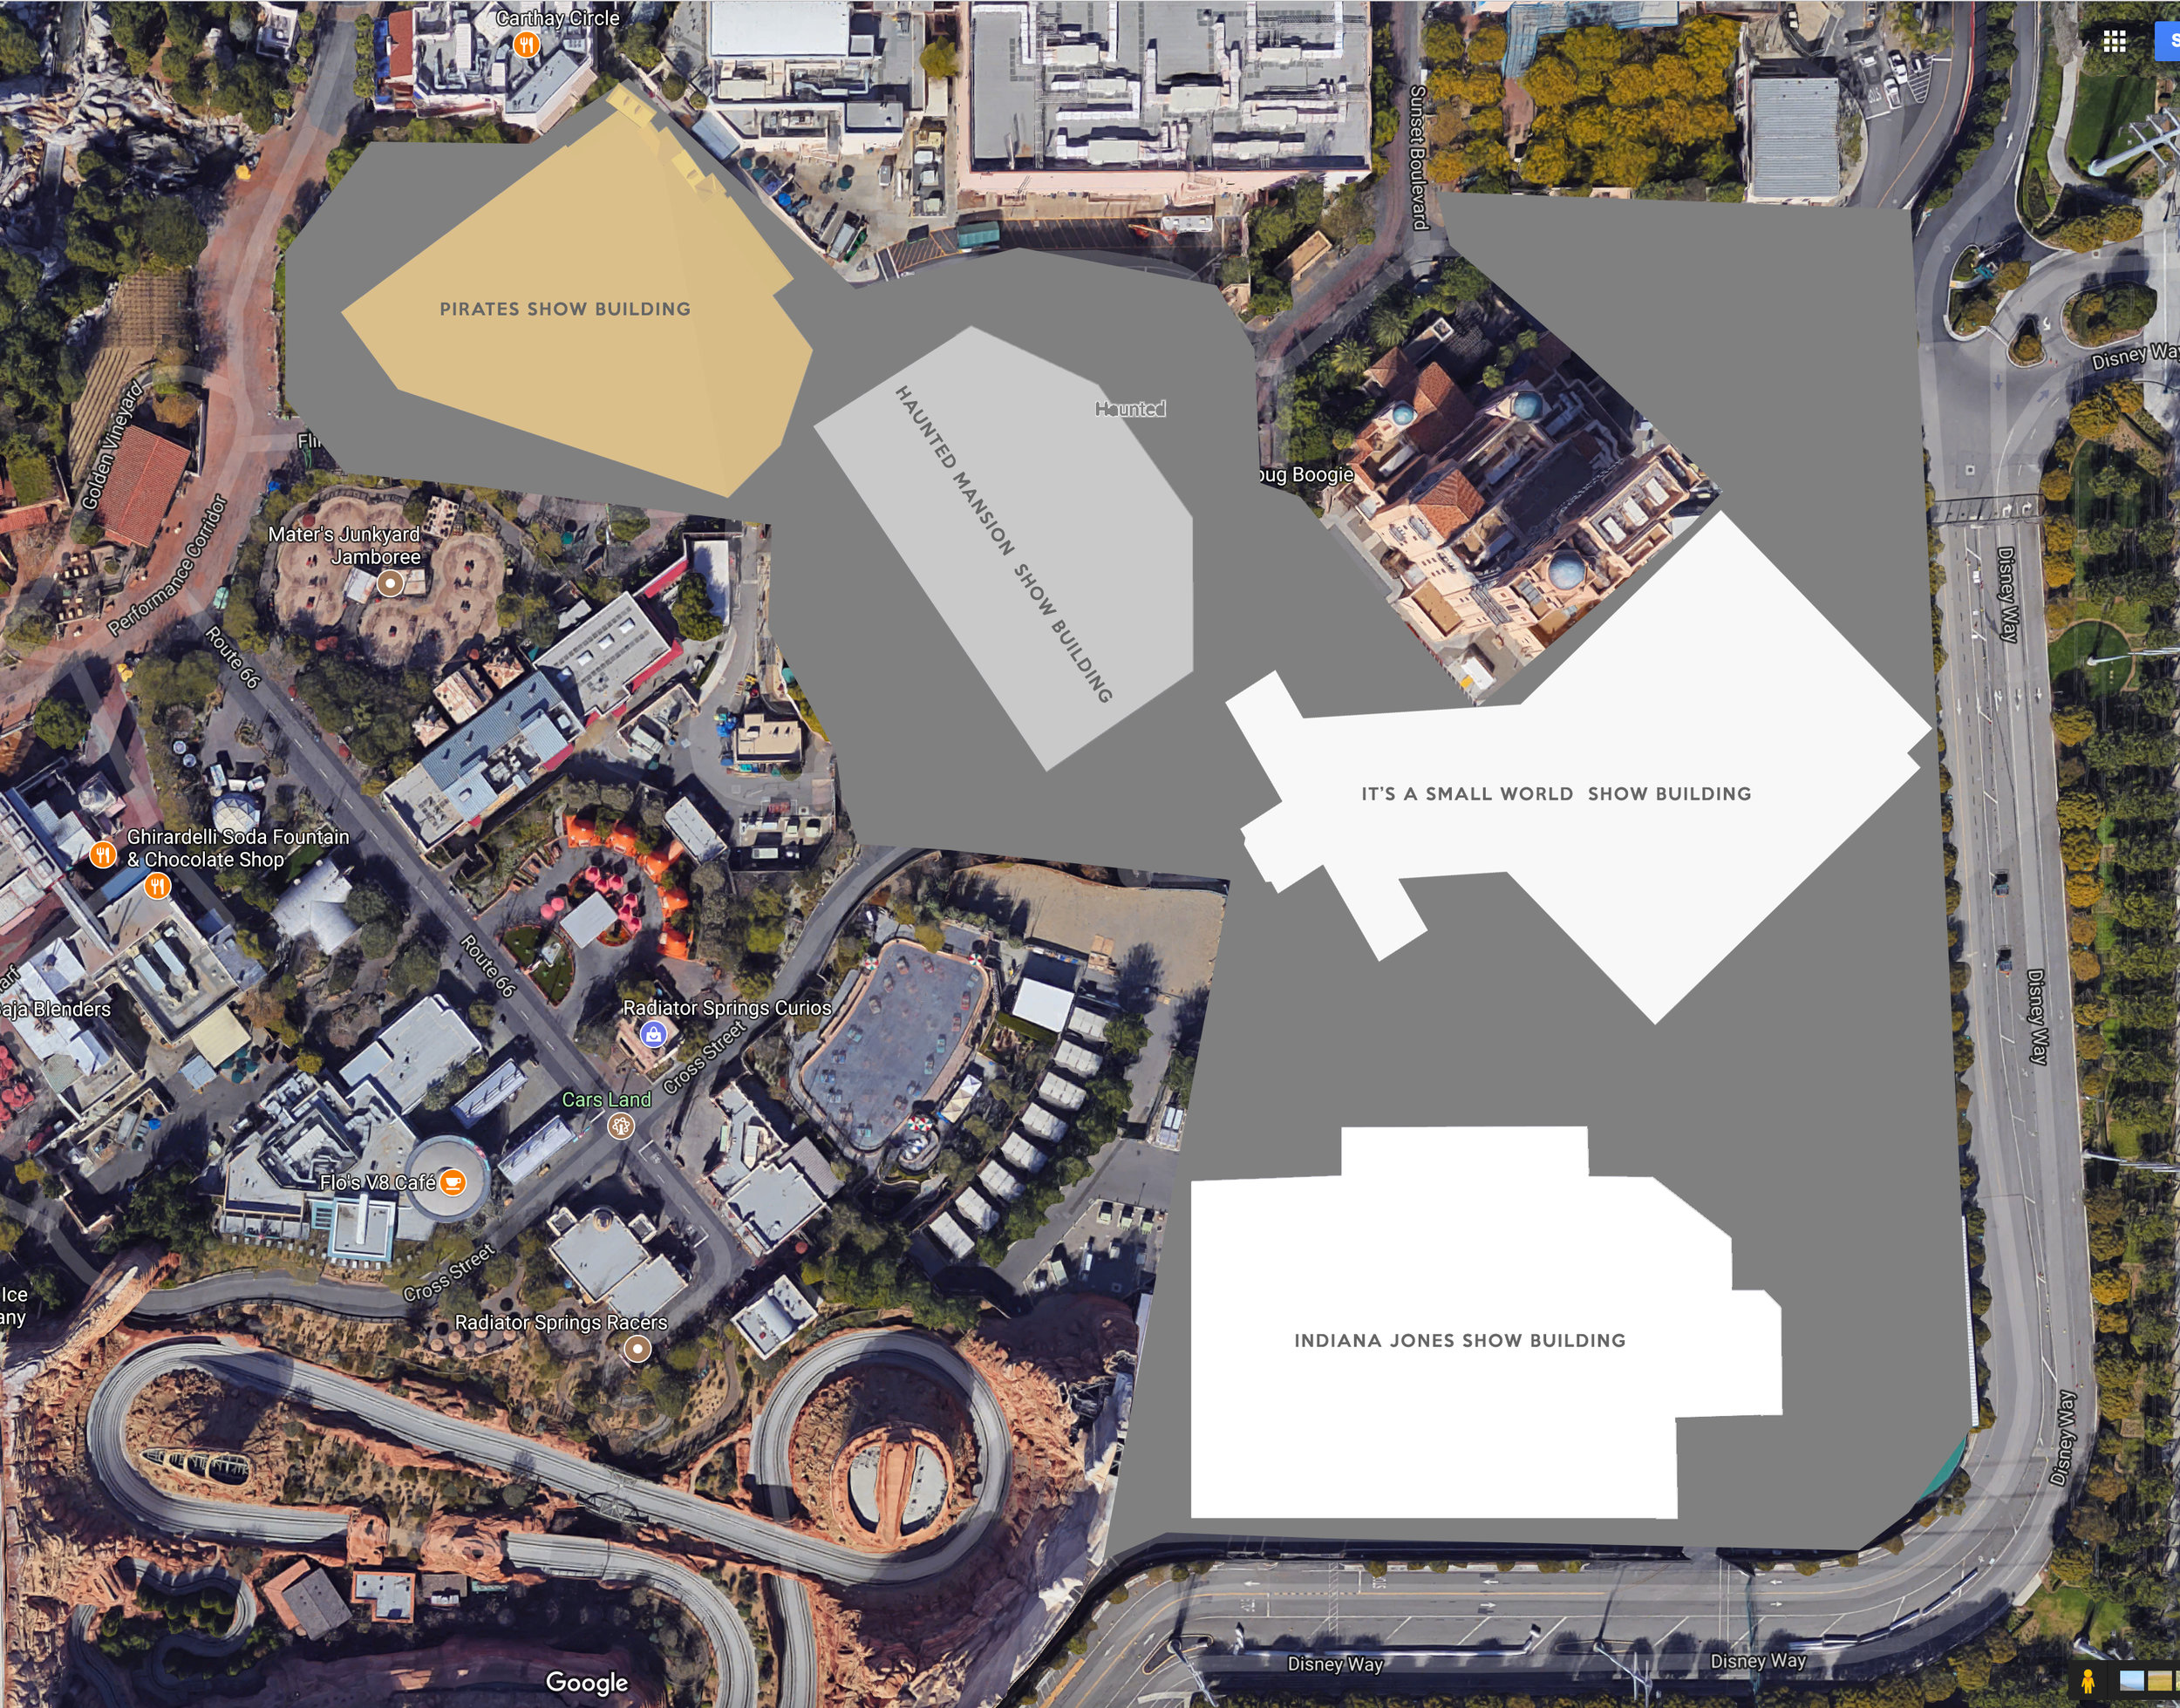  Possible area for future Marvel Land expansion project with familiar show buildings added for scale.&nbsp; 